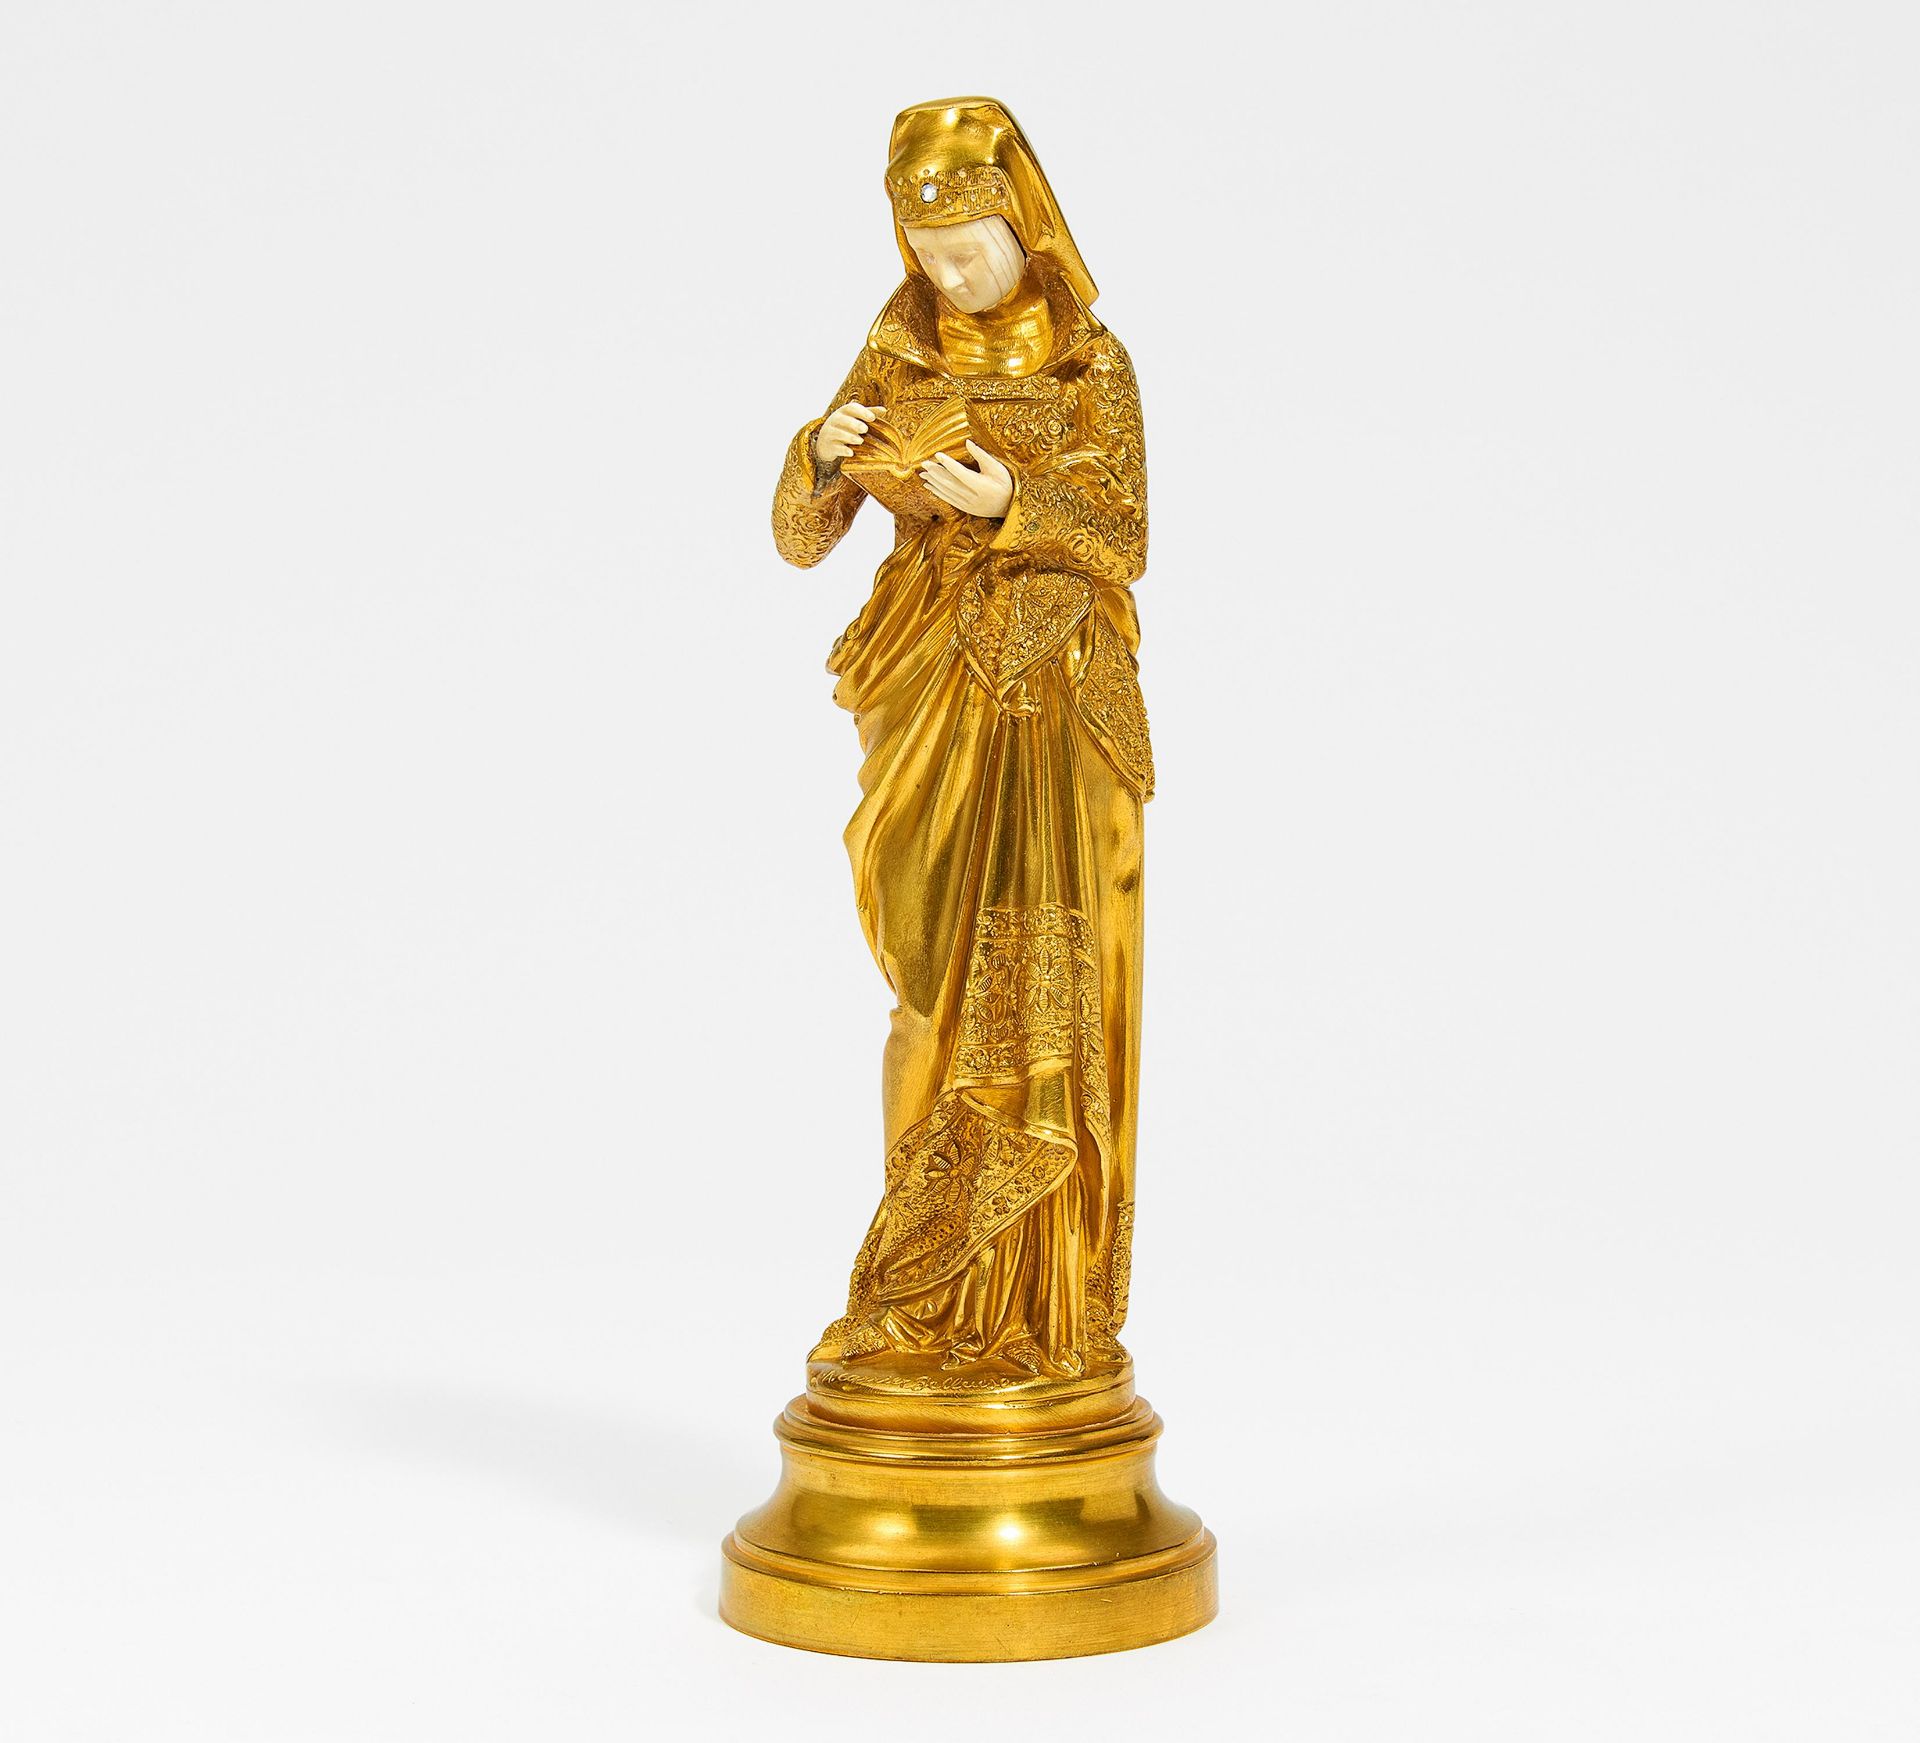 FIGURINE "LA LISEUSE" MADE OF IVORY AND GILDED BRONZE. Carrier-Belleuse, Albert. 1824 Ainzy-le-